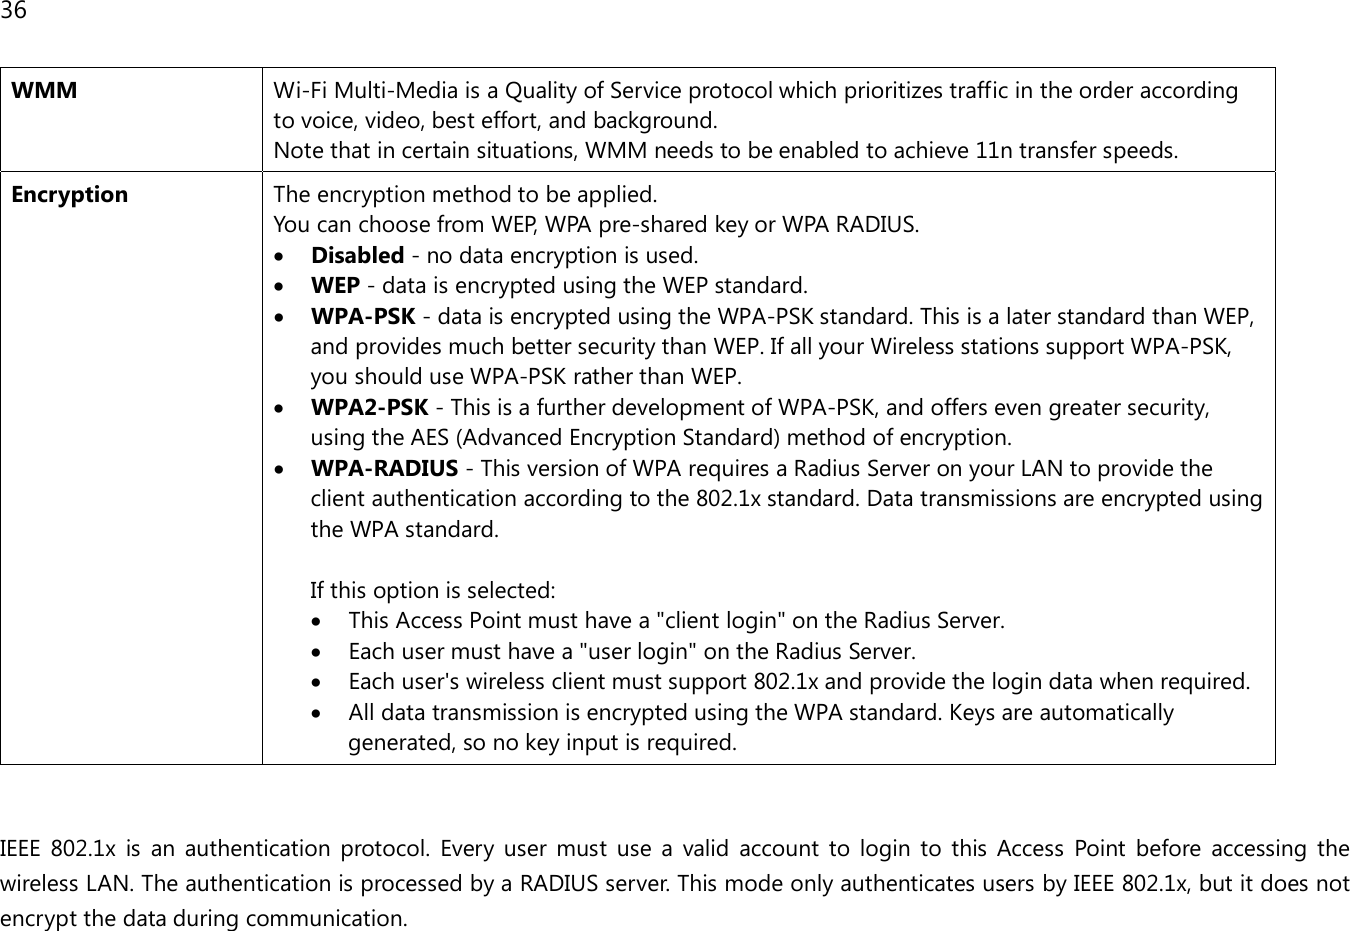 36  WMM Wi-Fi Multi-Media is a Quality of Service protocol which prioritizes traffic in the order according to voice, video, best effort, and background. Note that in certain situations, WMM needs to be enabled to achieve 11n transfer speeds. Encryption The encryption method to be applied. You can choose from WEP, WPA pre-shared key or WPA RADIUS. • Disabled - no data encryption is used. • WEP - data is encrypted using the WEP standard. • WPA-PSK - data is encrypted using the WPA-PSK standard. This is a later standard than WEP, and provides much better security than WEP. If all your Wireless stations support WPA-PSK, you should use WPA-PSK rather than WEP. • WPA2-PSK - This is a further development of WPA-PSK, and offers even greater security, using the AES (Advanced Encryption Standard) method of encryption. • WPA-RADIUS - This version of WPA requires a Radius Server on your LAN to provide the client authentication according to the 802.1x standard. Data transmissions are encrypted using the WPA standard.   If this option is selected:  • This Access Point must have a &quot;client login&quot; on the Radius Server.  • Each user must have a &quot;user login&quot; on the Radius Server.  • Each user&apos;s wireless client must support 802.1x and provide the login data when required.  • All data transmission is encrypted using the WPA standard. Keys are automatically generated, so no key input is required.    IEEE 802.1x is an authentication protocol. Every user must use a valid account to login to this Access Point before accessing the wireless LAN. The authentication is processed by a RADIUS server. This mode only authenticates users by IEEE 802.1x, but it does not encrypt the data during communication.    